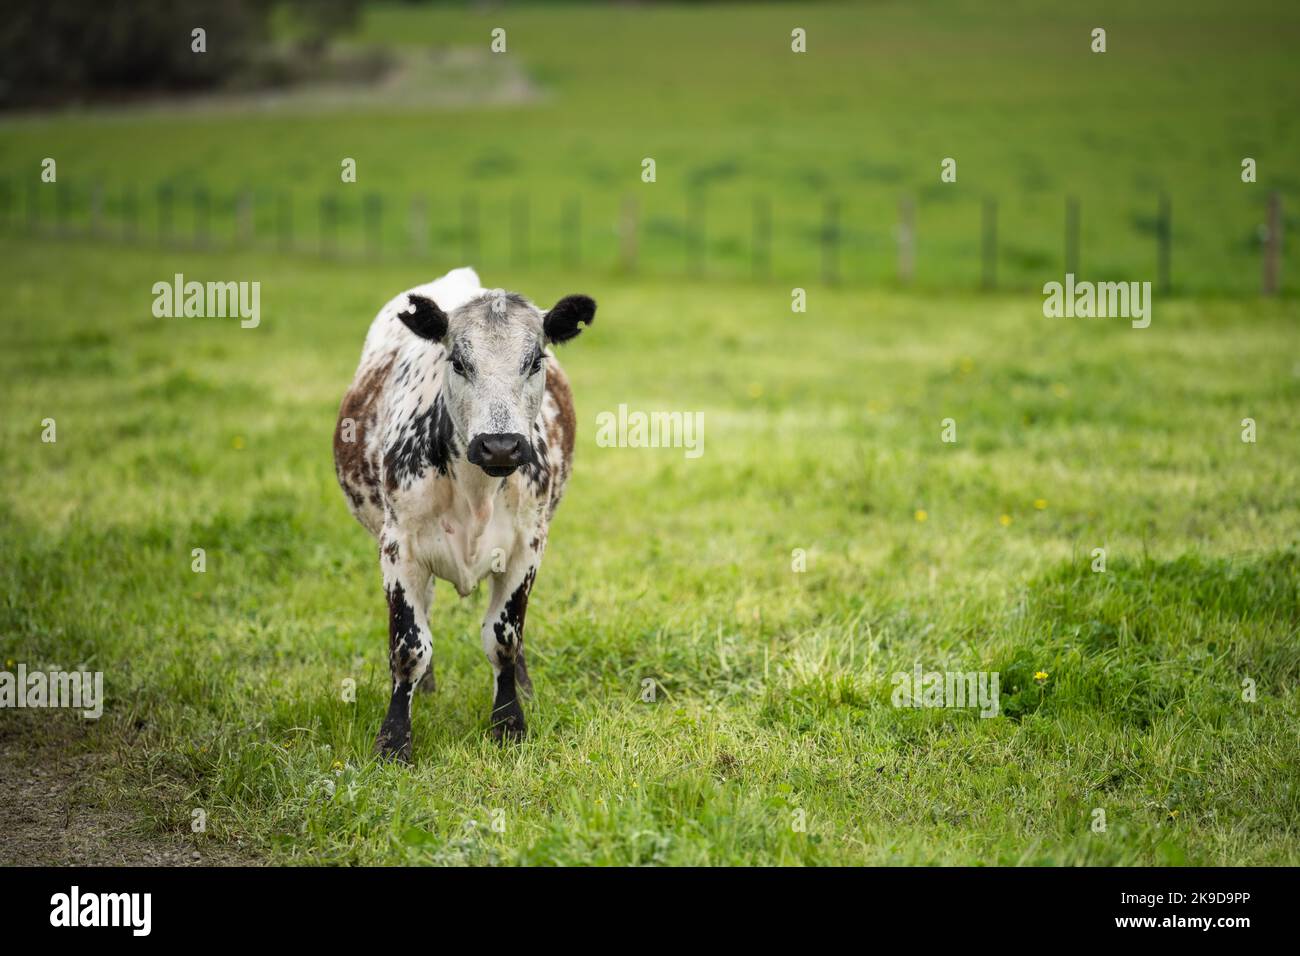 lose up of Stud Beef bulls, cows and calves grazing on grass in a field, in Australia. breeds of cattle include speckle park, murray grey, angus, bran Stock Photo